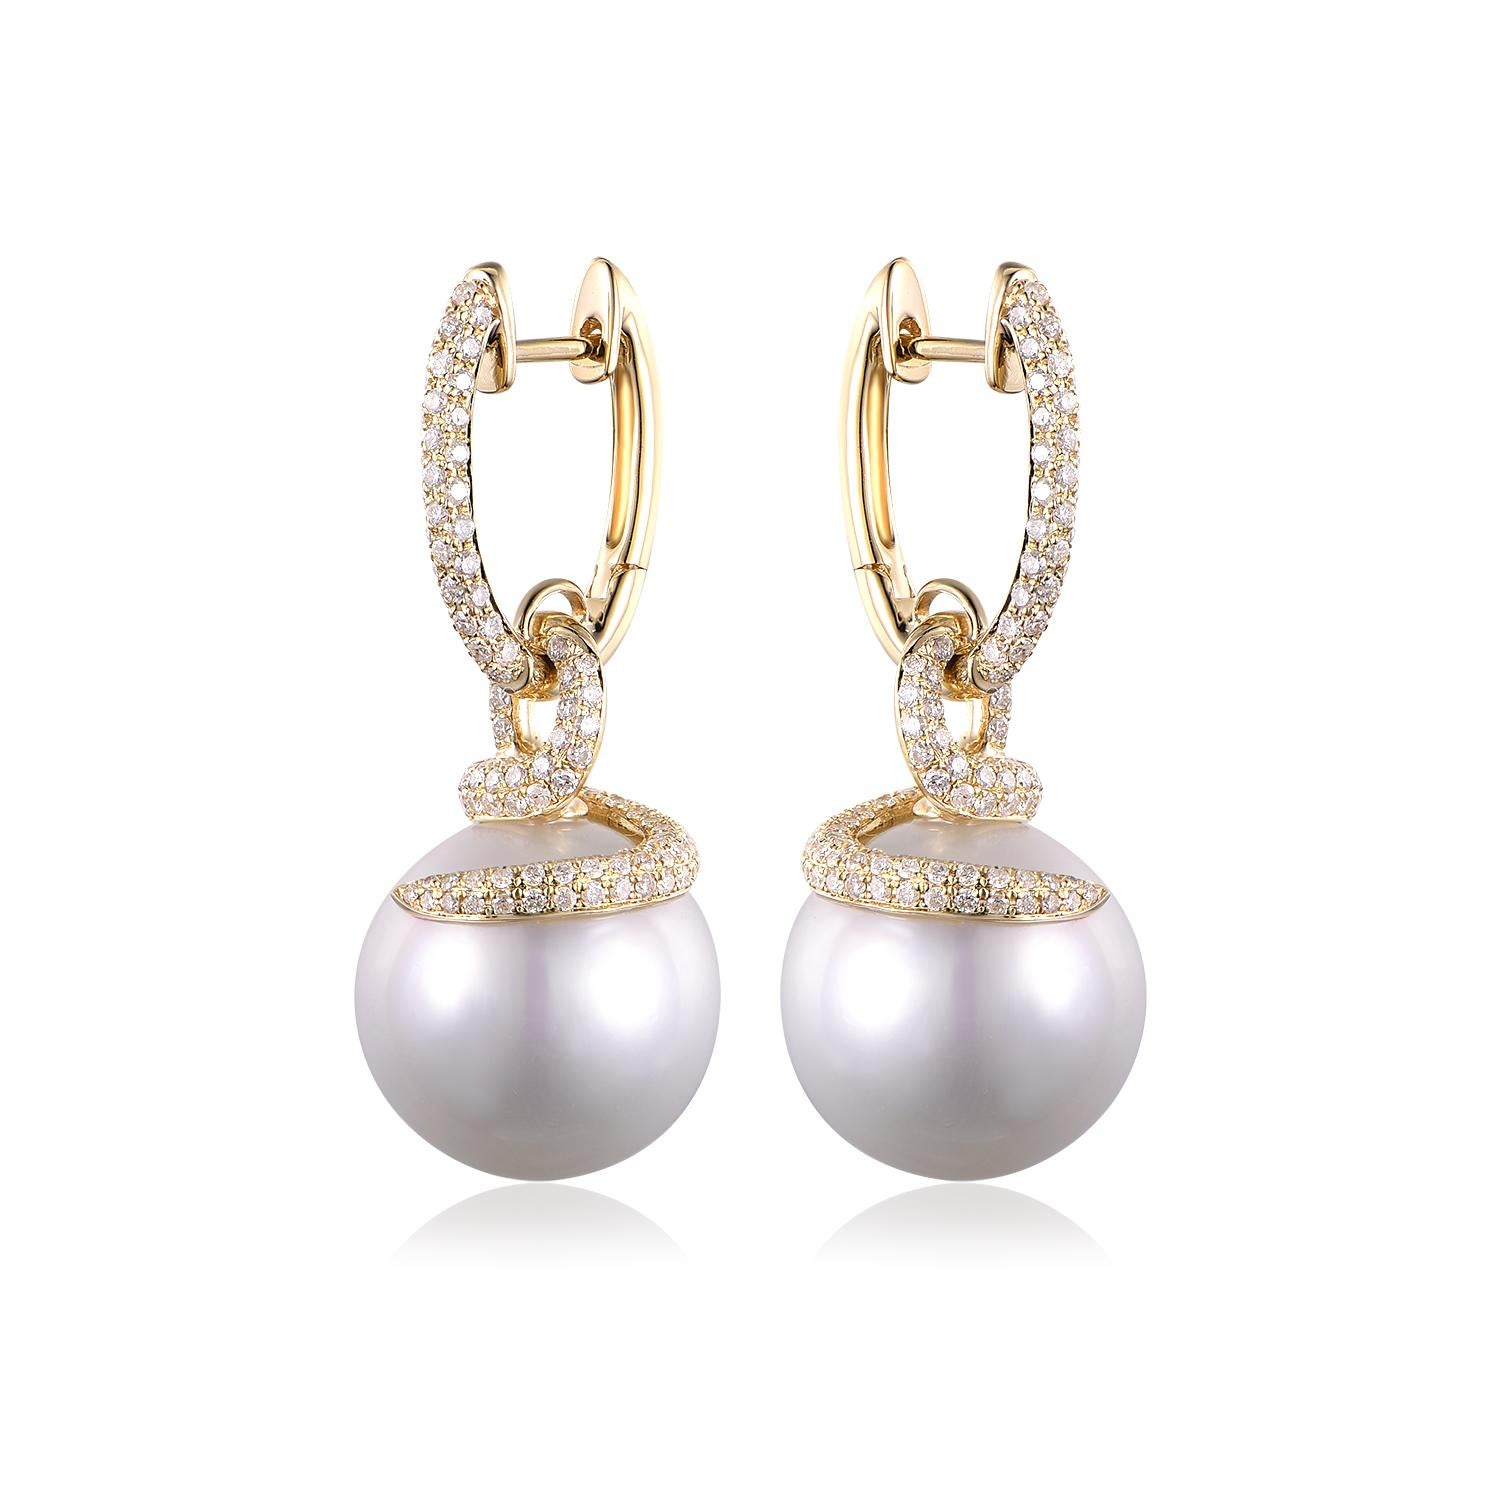 These stunning earrings feature exceptionally large South Sea pearls, their impressive size of 13.5 x 16mm showcasing the pearls' luxurious sheen and near-perfect form. Cradled in the embrace of 14K yellow gold, these magnificent pearls radiate with